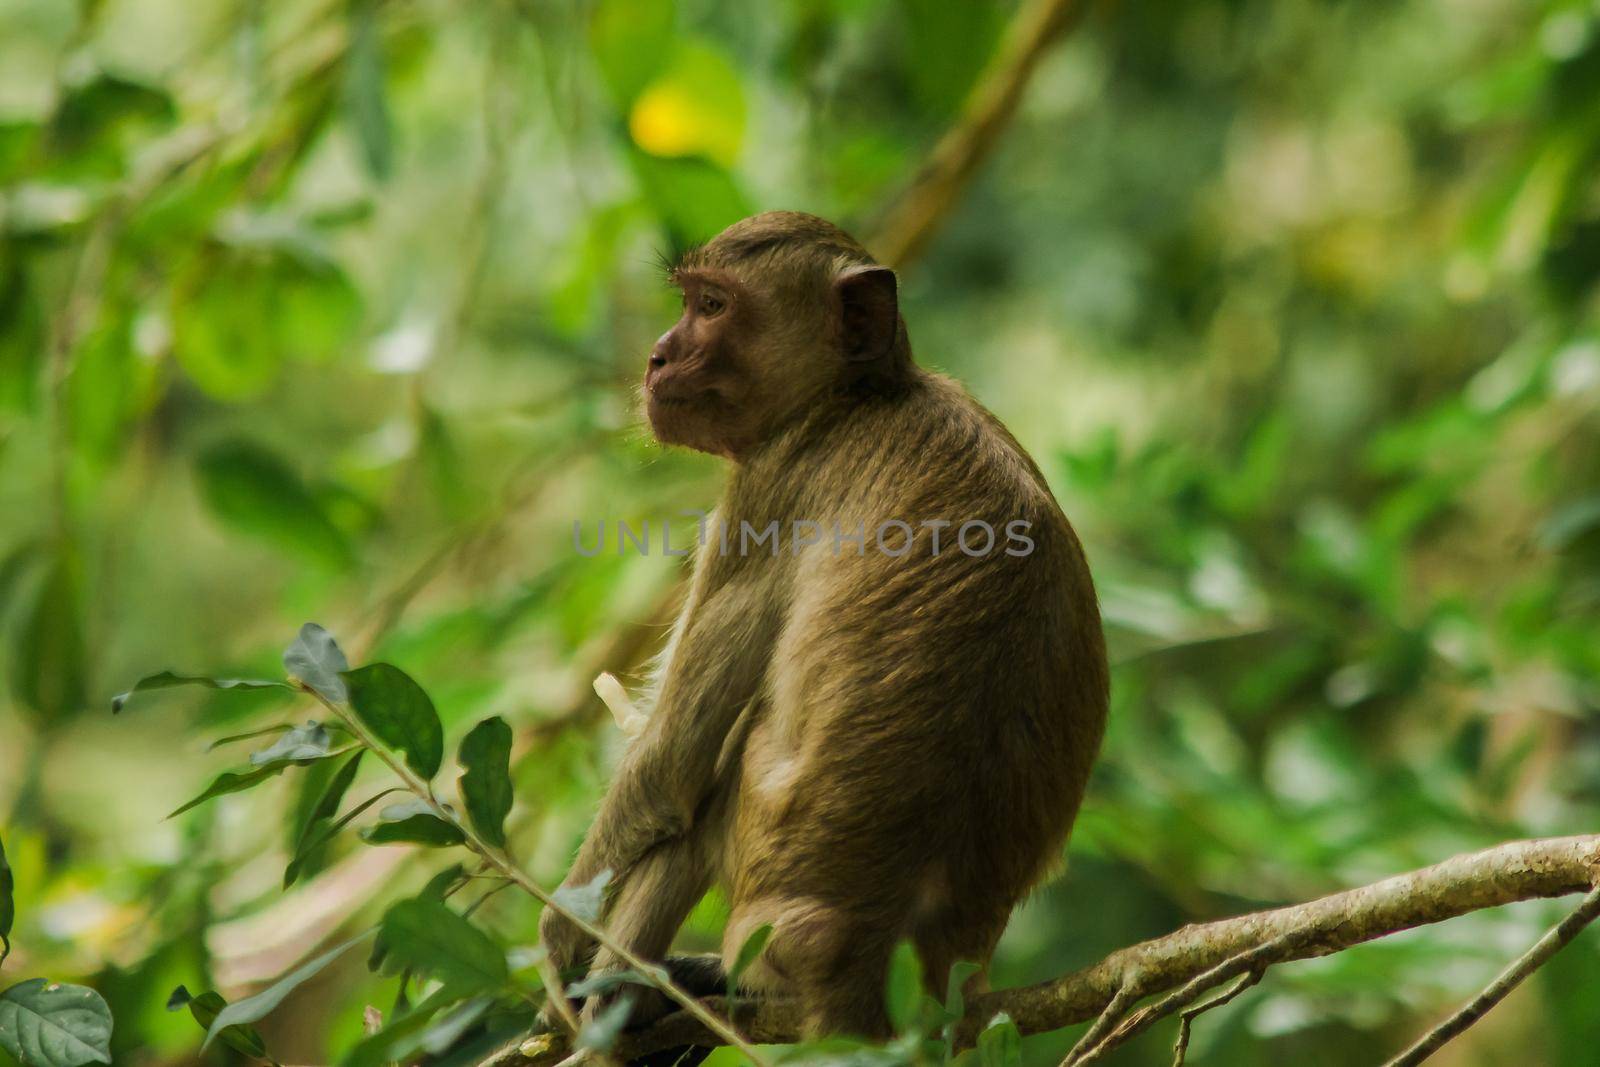 Crab-eating Macaque is sitting on a branch.
The macaque has brown hair on its body. The tail is longer than the length of the body. The hair in the middle of the head is pointed upright.